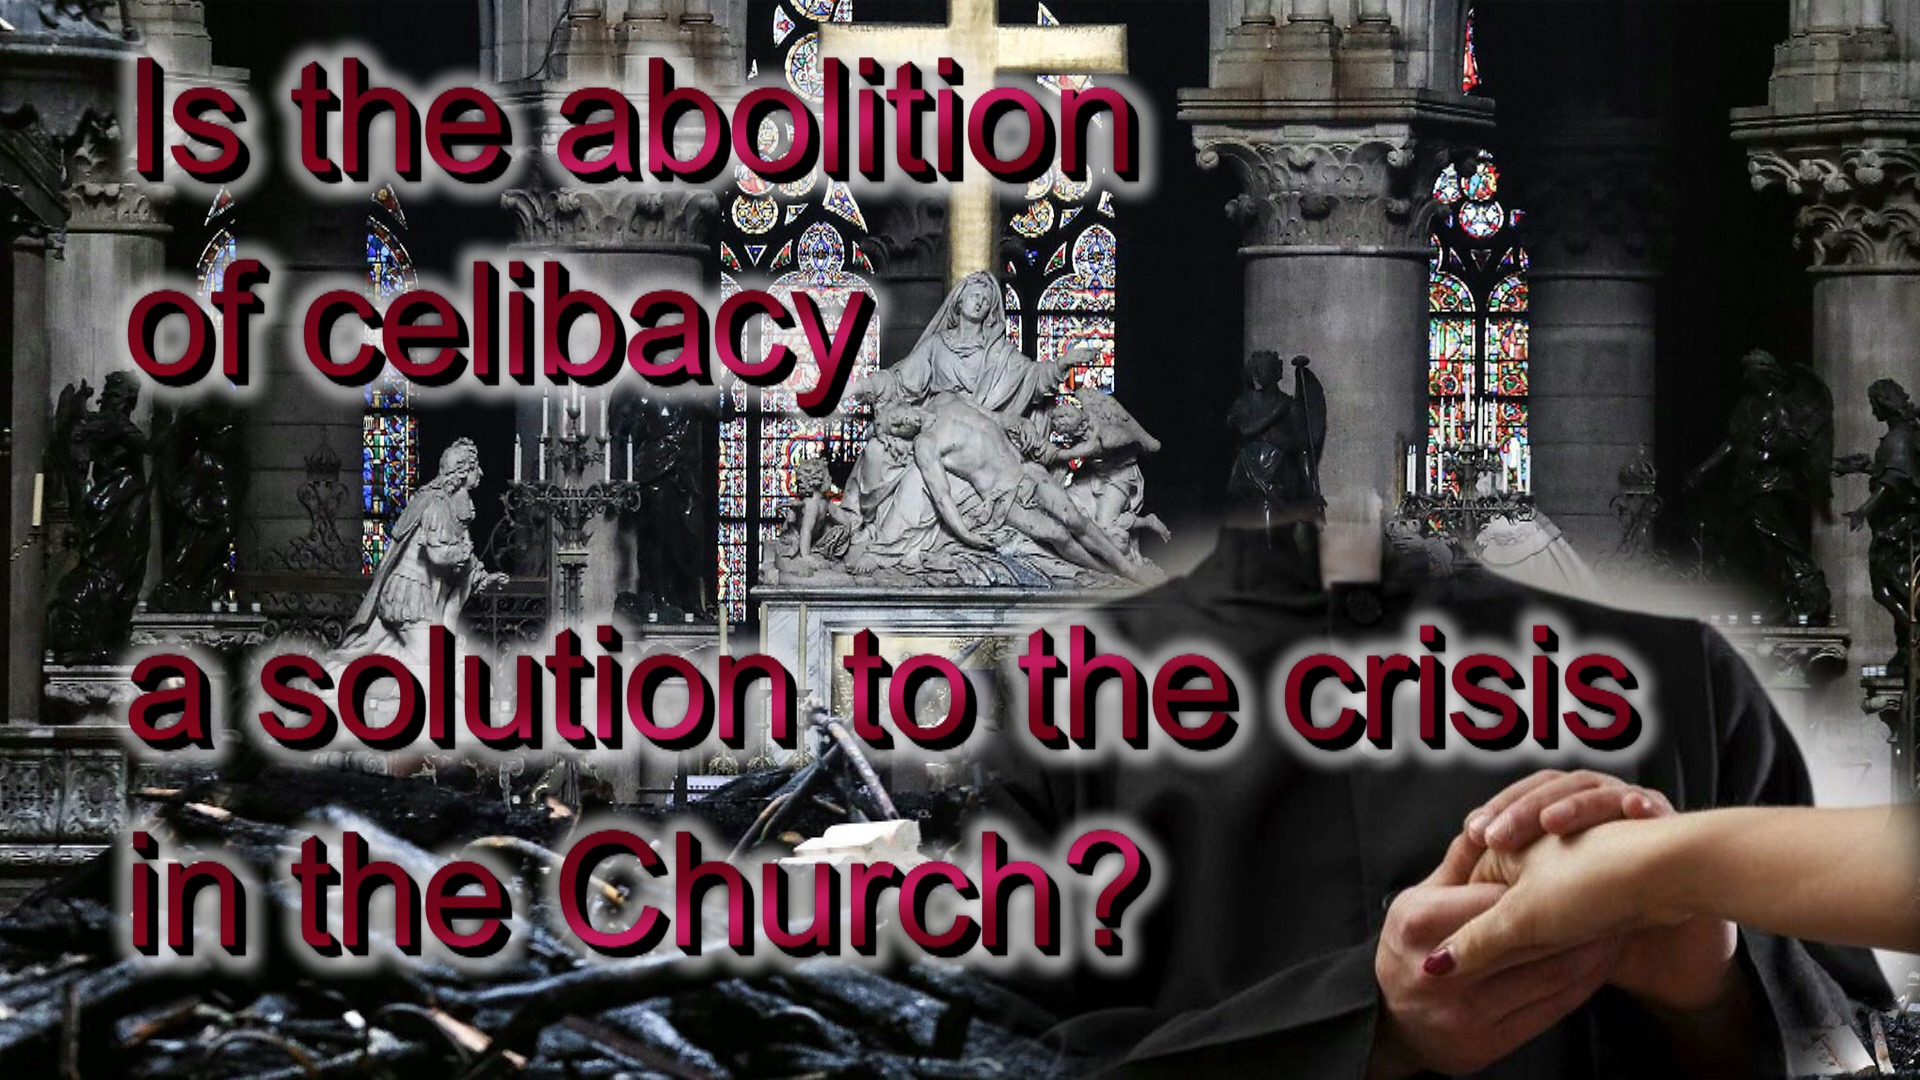 Is the abolition of celibacy a solution to the crisis in the Church?